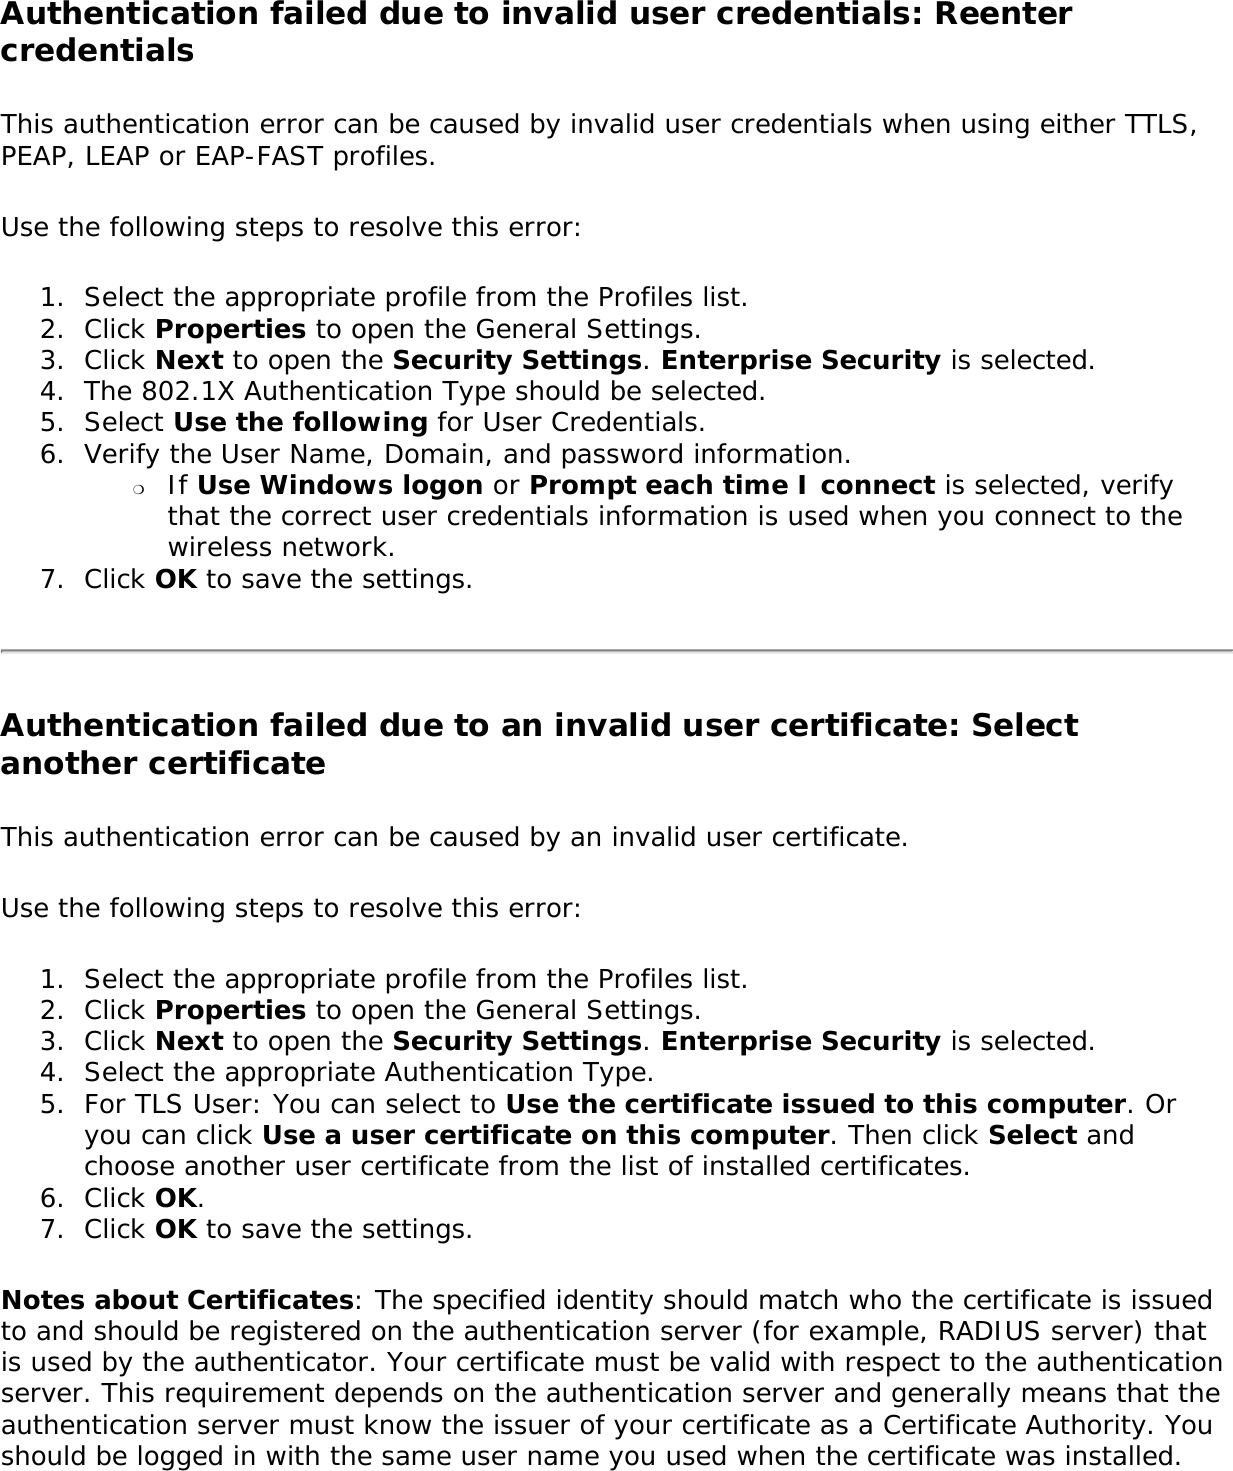 Authentication failed due to invalid user credentials: Reenter credentialsThis authentication error can be caused by invalid user credentials when using either TTLS, PEAP, LEAP or EAP-FAST profiles.Use the following steps to resolve this error:1.  Select the appropriate profile from the Profiles list.2.  Click Properties to open the General Settings. 3.  Click Next to open the Security Settings. Enterprise Security is selected. 4.  The 802.1X Authentication Type should be selected.5.  Select Use the following for User Credentials.6.  Verify the User Name, Domain, and password information.❍     If Use Windows logon or Prompt each time I connect is selected, verify that the correct user credentials information is used when you connect to the wireless network.7.  Click OK to save the settings.Authentication failed due to an invalid user certificate: Select another certificateThis authentication error can be caused by an invalid user certificate. Use the following steps to resolve this error:1.  Select the appropriate profile from the Profiles list.2.  Click Properties to open the General Settings.3.  Click Next to open the Security Settings. Enterprise Security is selected.4.  Select the appropriate Authentication Type.5.  For TLS User: You can select to Use the certificate issued to this computer. Or you can click Use a user certificate on this computer. Then click Select and choose another user certificate from the list of installed certificates.6.  Click OK.7.  Click OK to save the settings.Notes about Certificates: The specified identity should match who the certificate is issued to and should be registered on the authentication server (for example, RADIUS server) that is used by the authenticator. Your certificate must be valid with respect to the authentication server. This requirement depends on the authentication server and generally means that the authentication server must know the issuer of your certificate as a Certificate Authority. You should be logged in with the same user name you used when the certificate was installed.